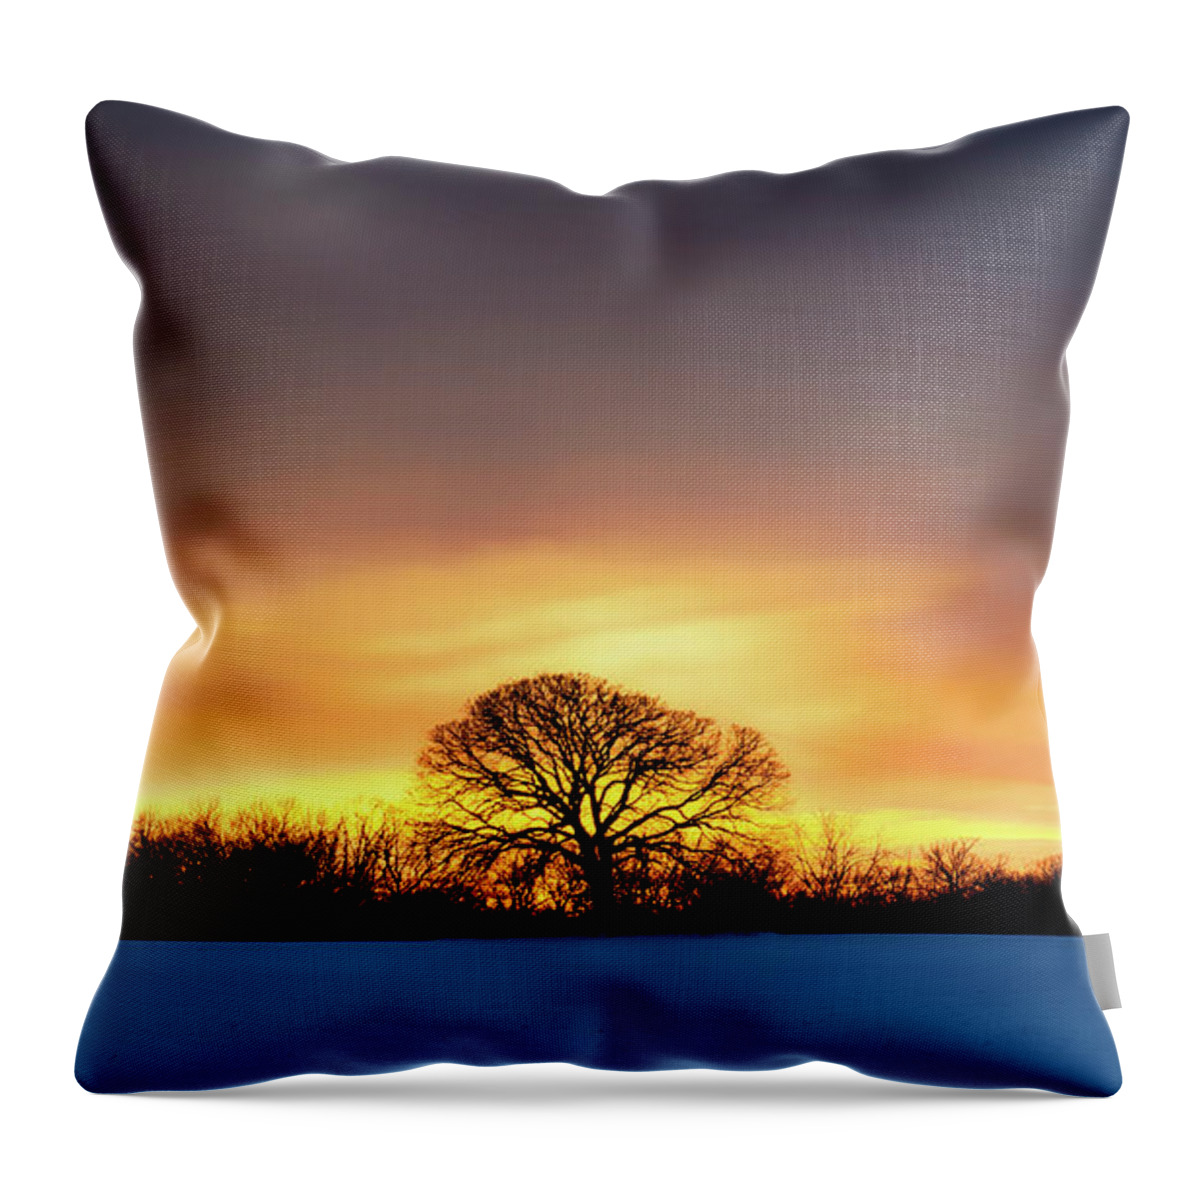  Throw Pillow featuring the photograph Fire In The Sky #1 by Dan Hefle